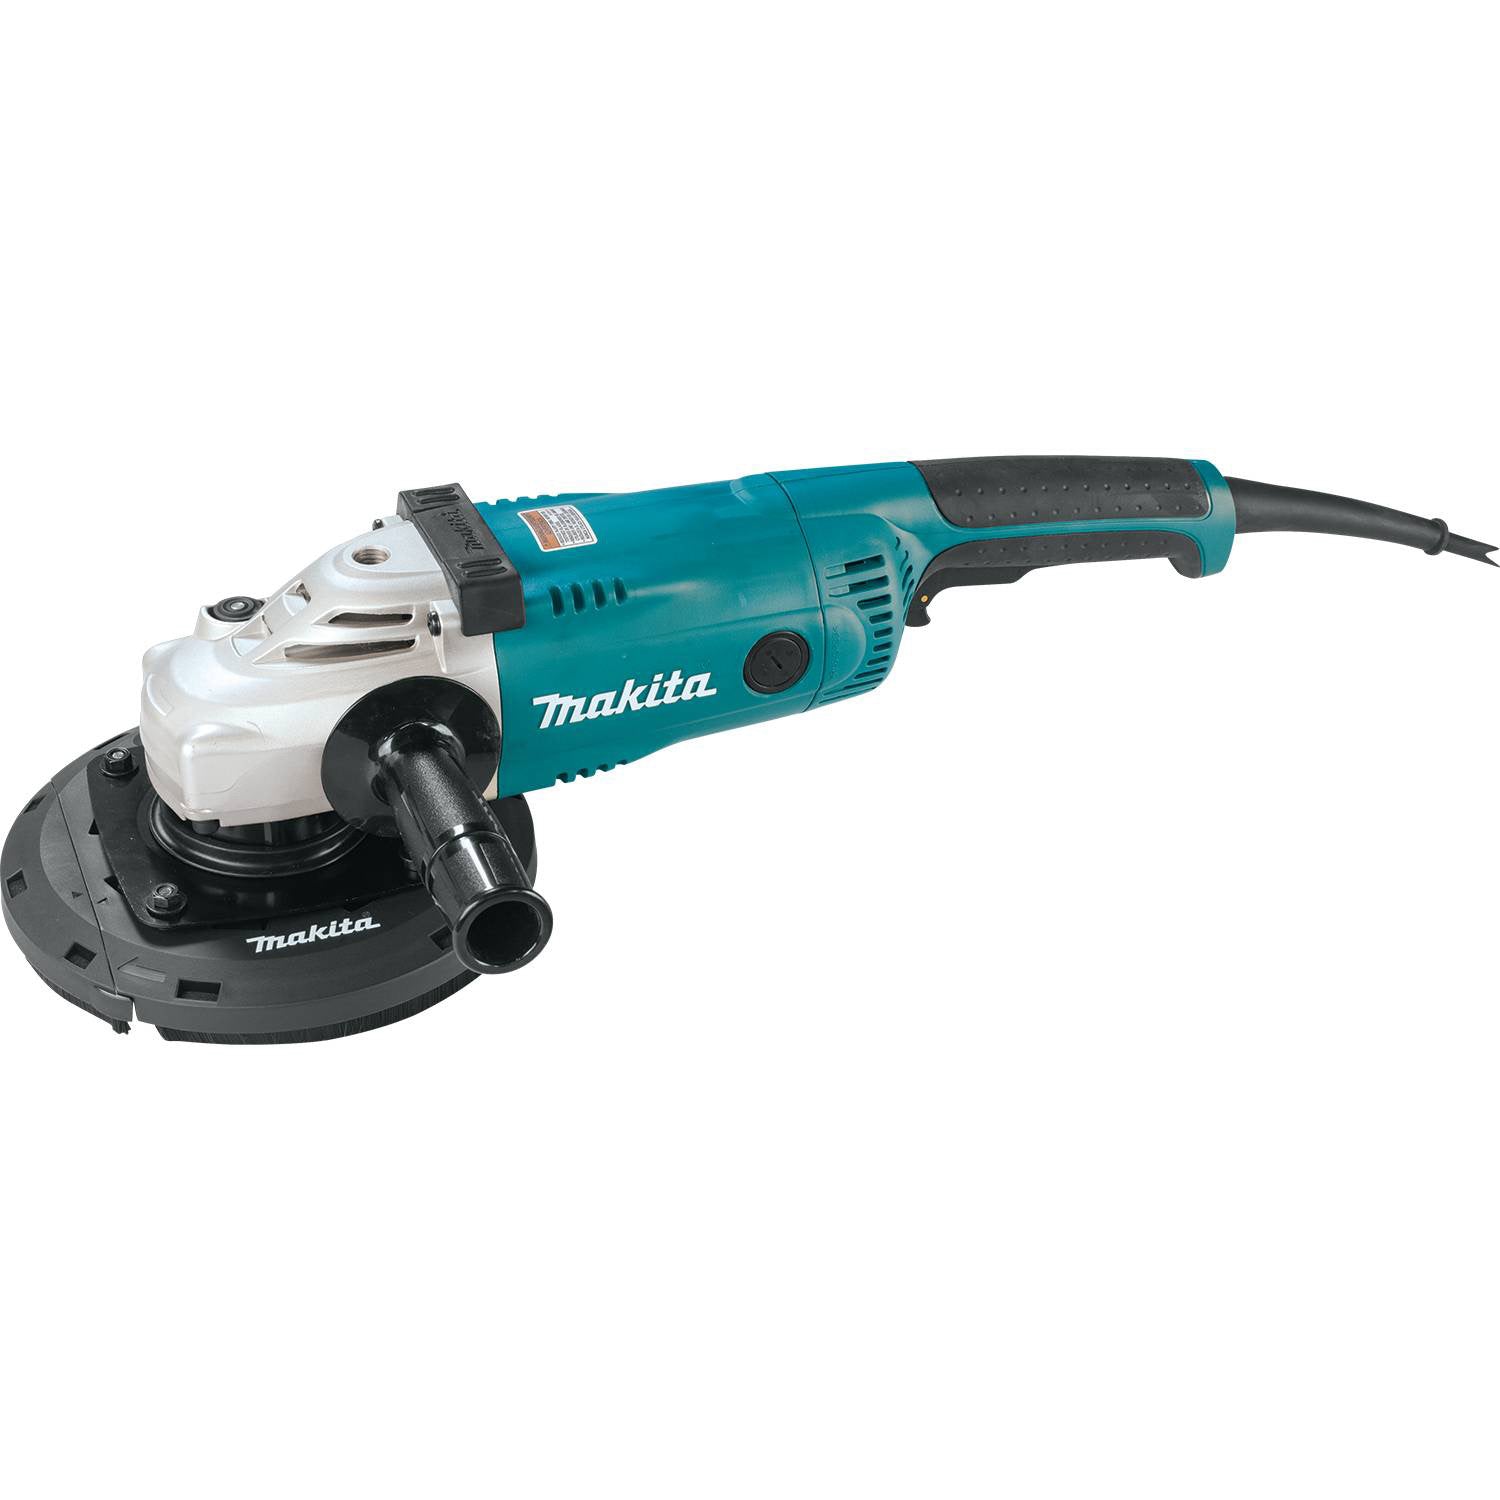 15 Amp 7" Angle Grinder with Tool-Less Adjustment